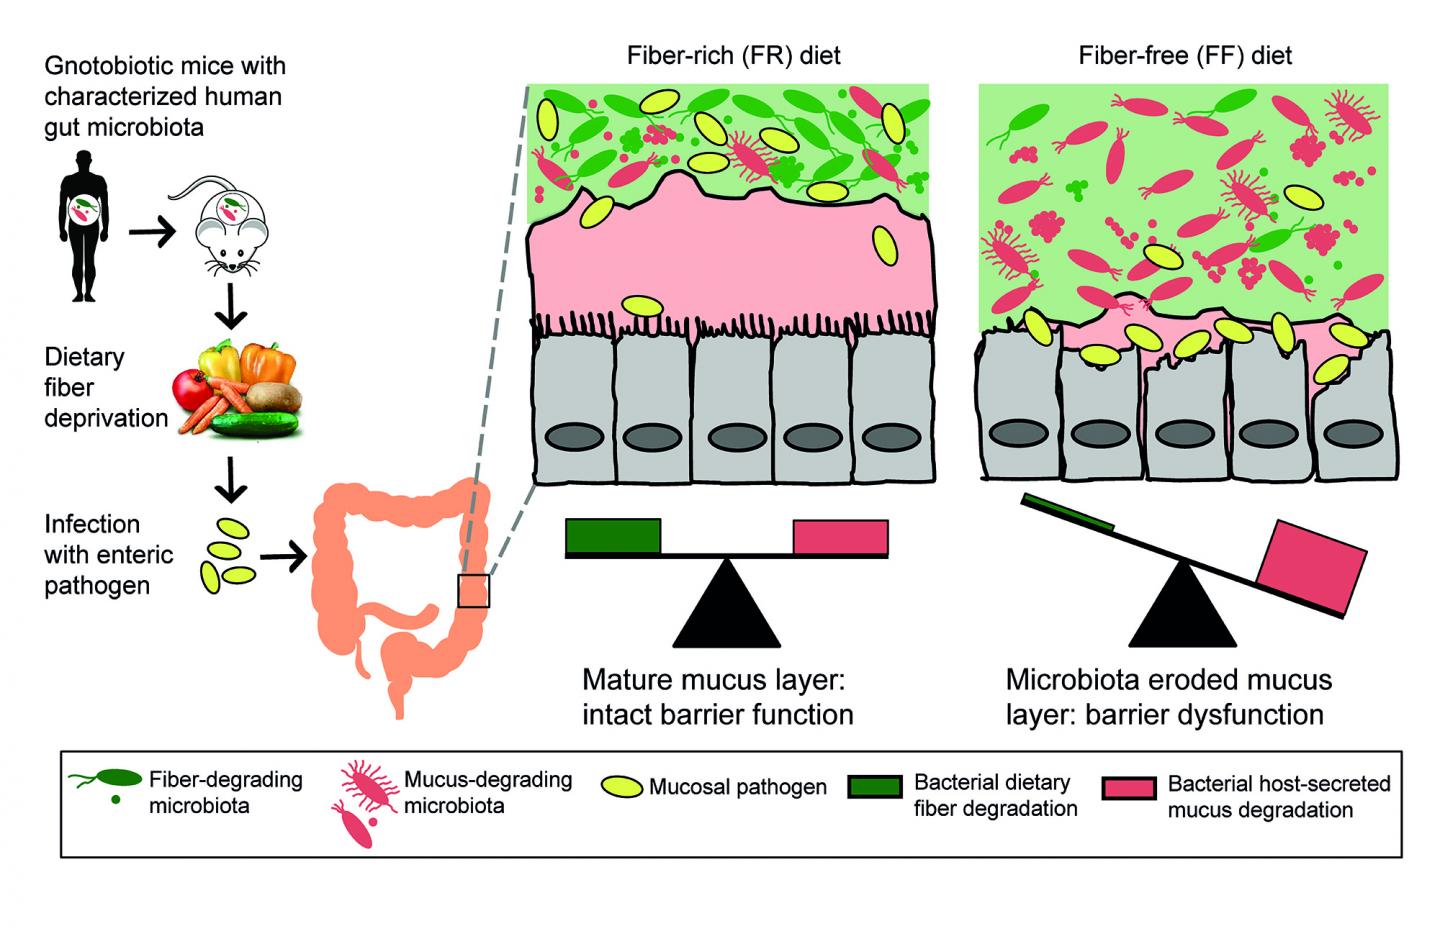 Impact of Dietary Fiber on Gut Microbiome